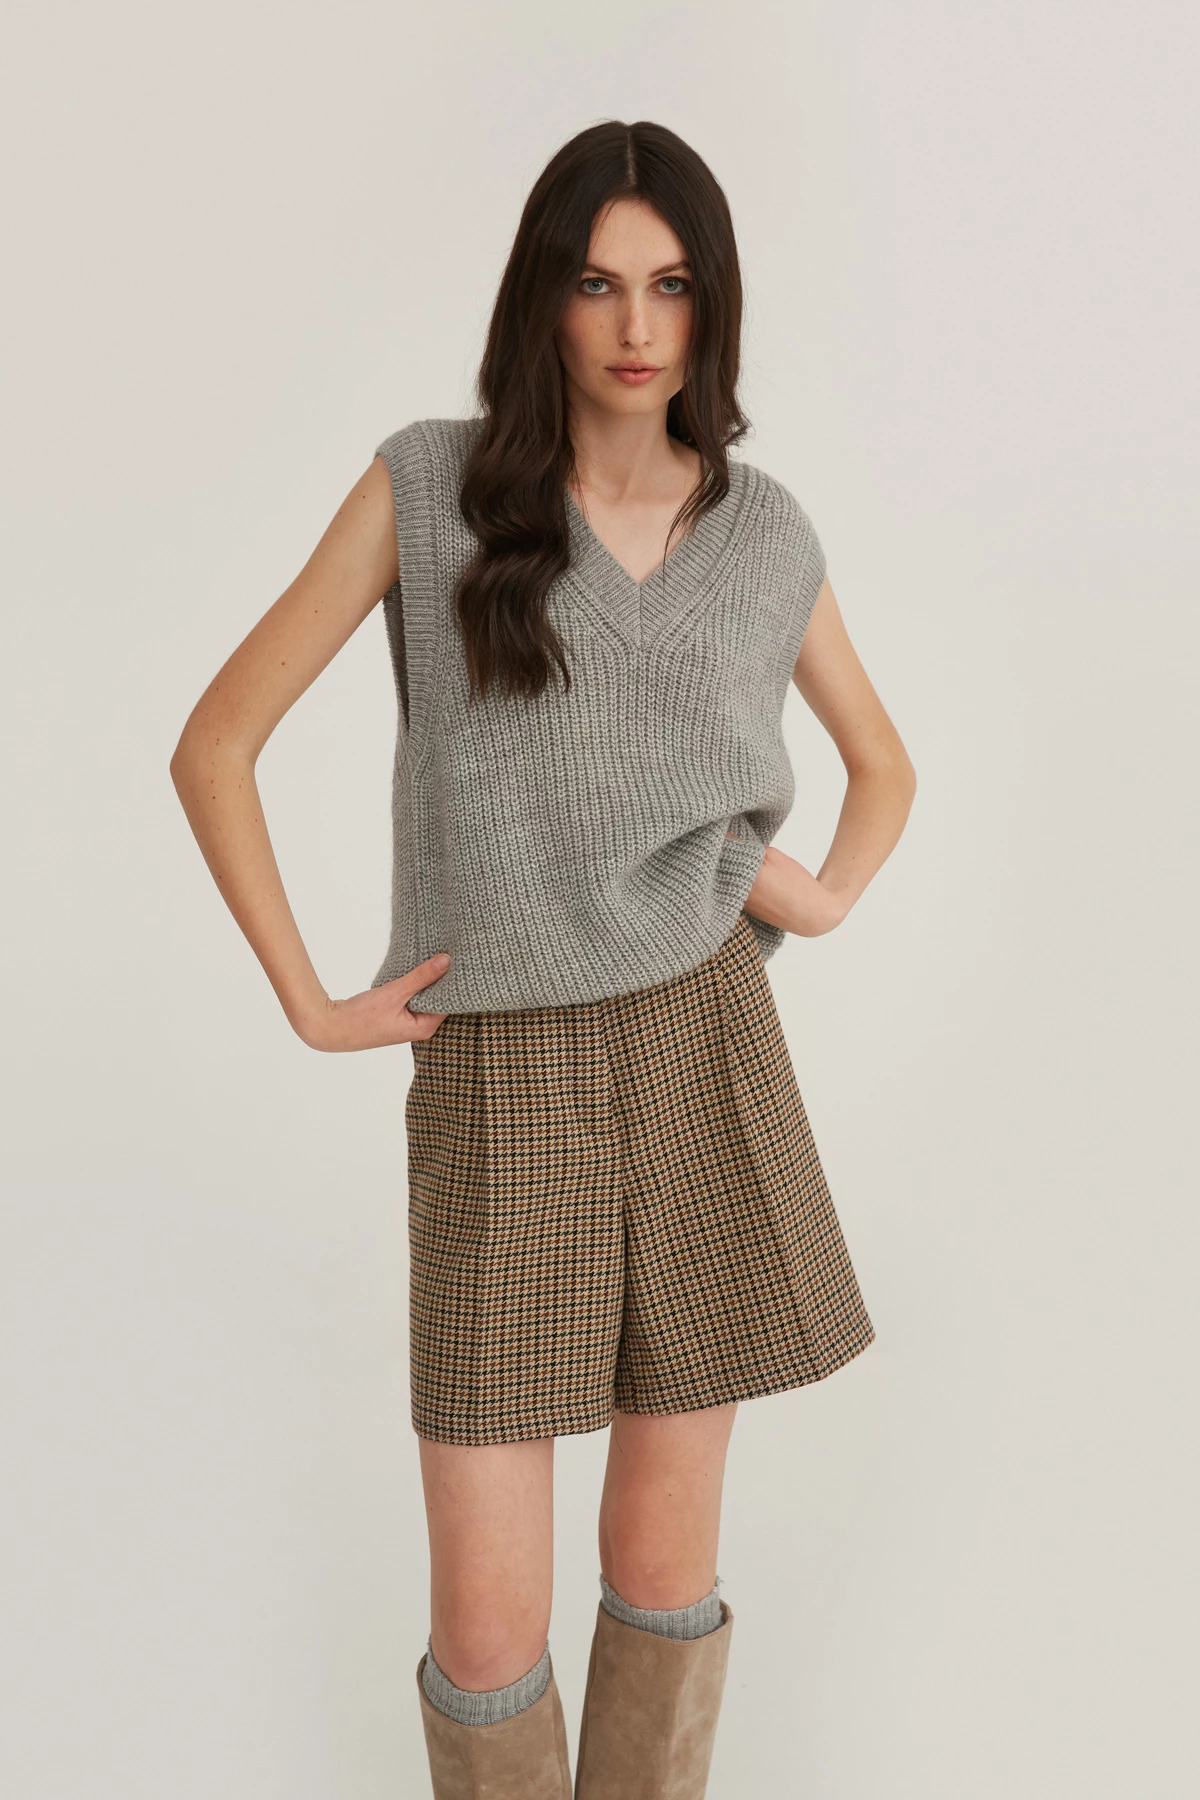 Straight-cut elongetaed shorts in houndstooth pattern with wool, photo 3